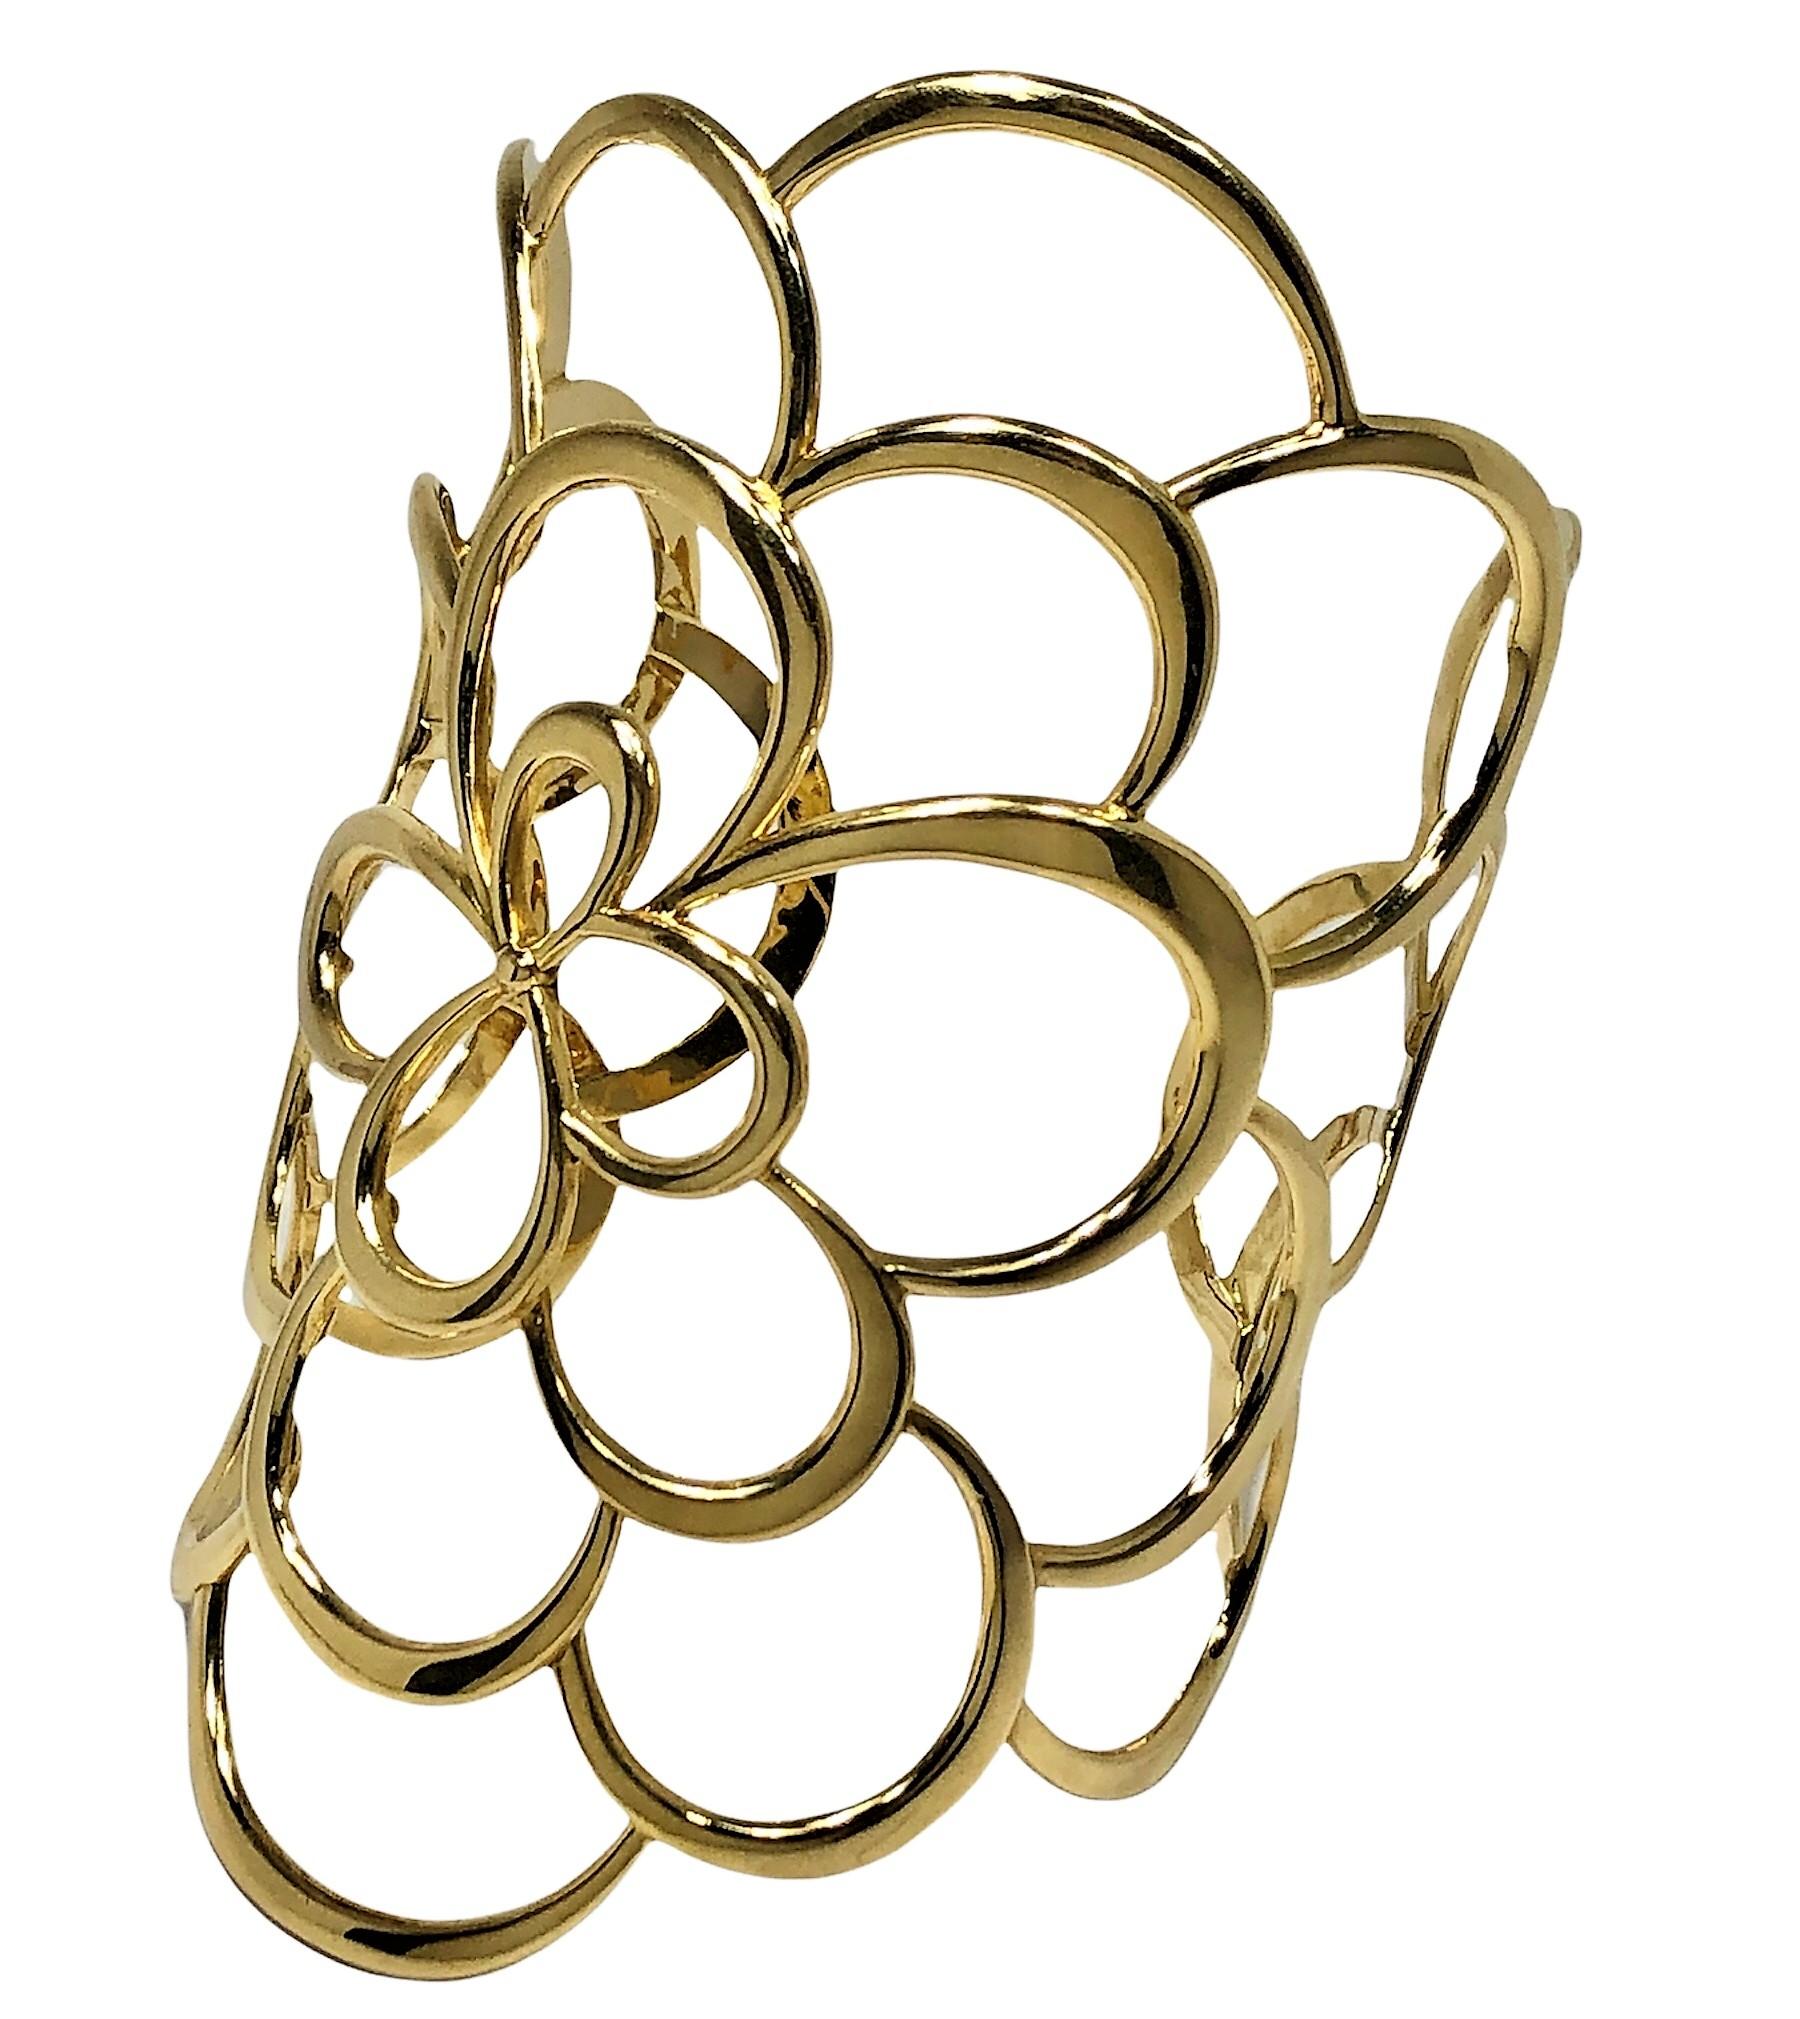 This imaginative and large 18k cuff, signed VIVARA, conveys the impression that it is one enormous Camellia flower. The cuff measures 3 7/8 inches from top to bottom and was crafted for comfortable wear on a small / medium to medium wrist. Open in